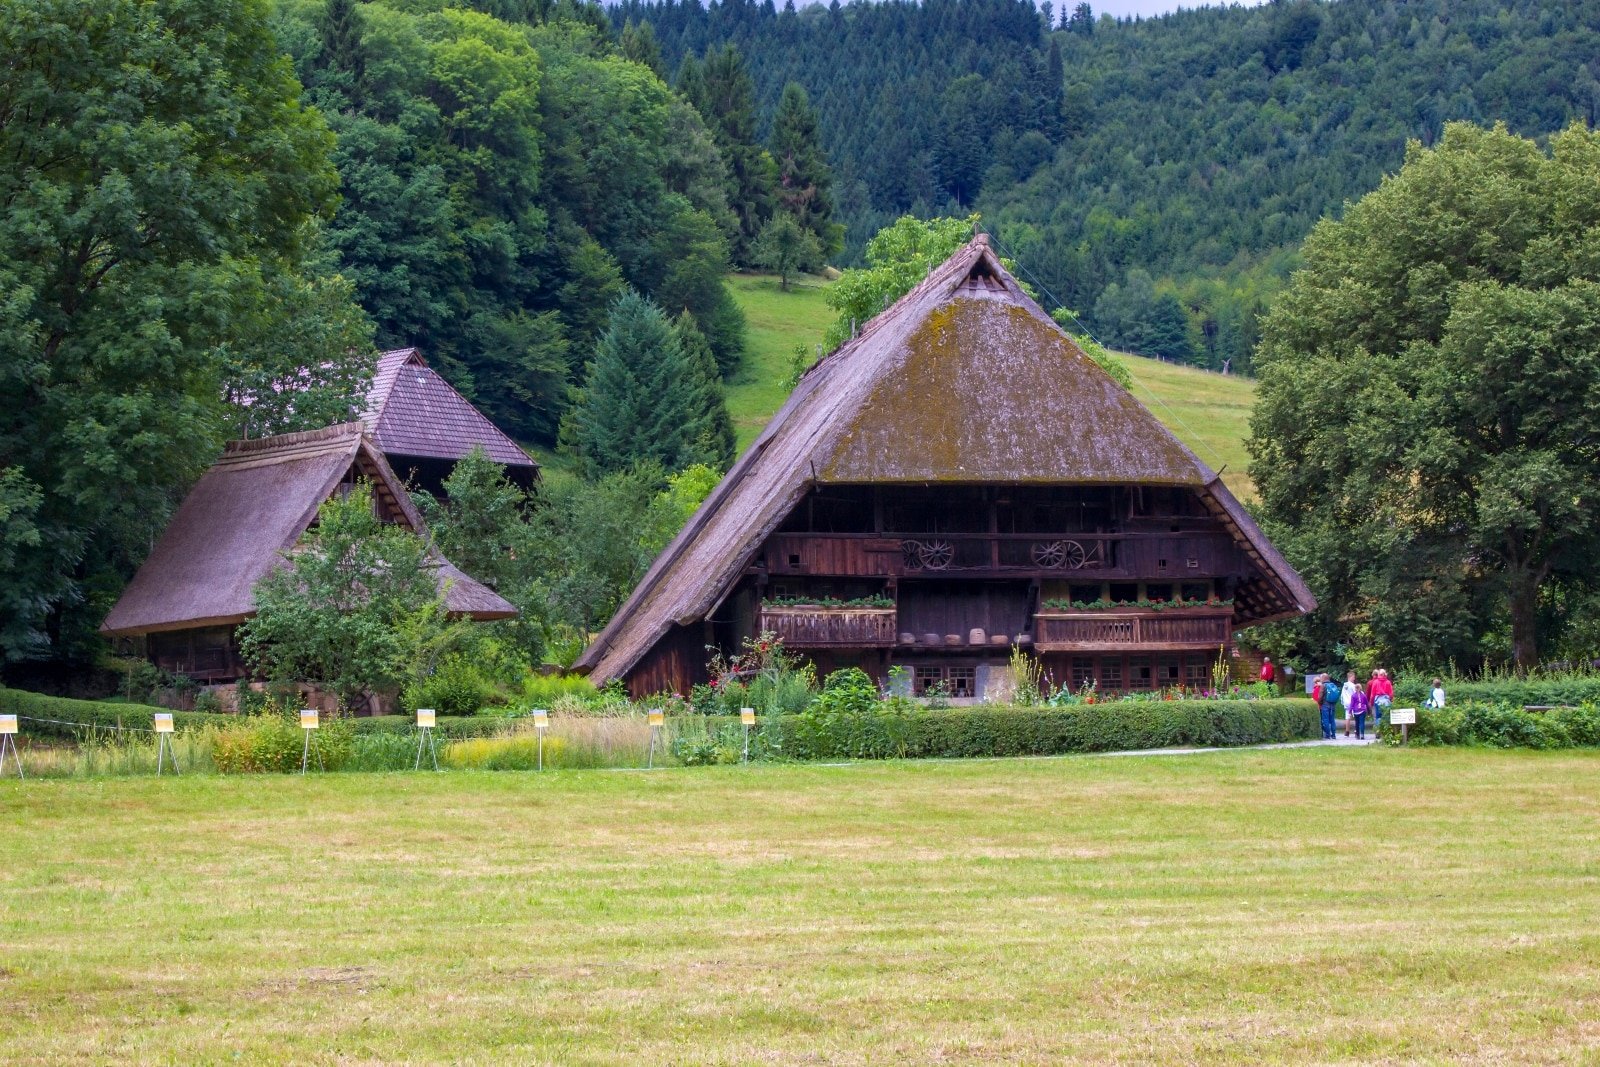 <p><span>The Black Forest Open Air Museum, or Vogtsbauernhof, offers a unique insight into the region’s rural history and architecture. Located in Gutach, the museum features original farmhouses dating back several centuries, each representing different parts of the Black Forest. </span></p> <p><span>Walking through the museum, you’ll see traditional Black Forest houses, barns, mills, and workshops, all meticulously preserved. The museum also hosts demonstrations of traditional crafts and farming techniques, providing a hands-on experience of the region’s cultural heritage.</span></p> <p><span>A visit to the Vogtsbauernhof is a journey back in time, offering a deeper understanding of the Black Forest’s history and the lifestyle of its past inhabitants.</span></p> <p><b>Insider’s Tip: </b><span>Participate in the hands-on activities and workshops to fully immerse yourself in the region’s history.</span></p> <p><b>How To Get There: </b><span>The museum is located in Gutach and is accessible by train and bus from Offenburg.</span></p> <p><b>Best Time To Travel: </b><span>Spring to autumn, when the museum hosts various cultural events and demonstrations.</span></p>